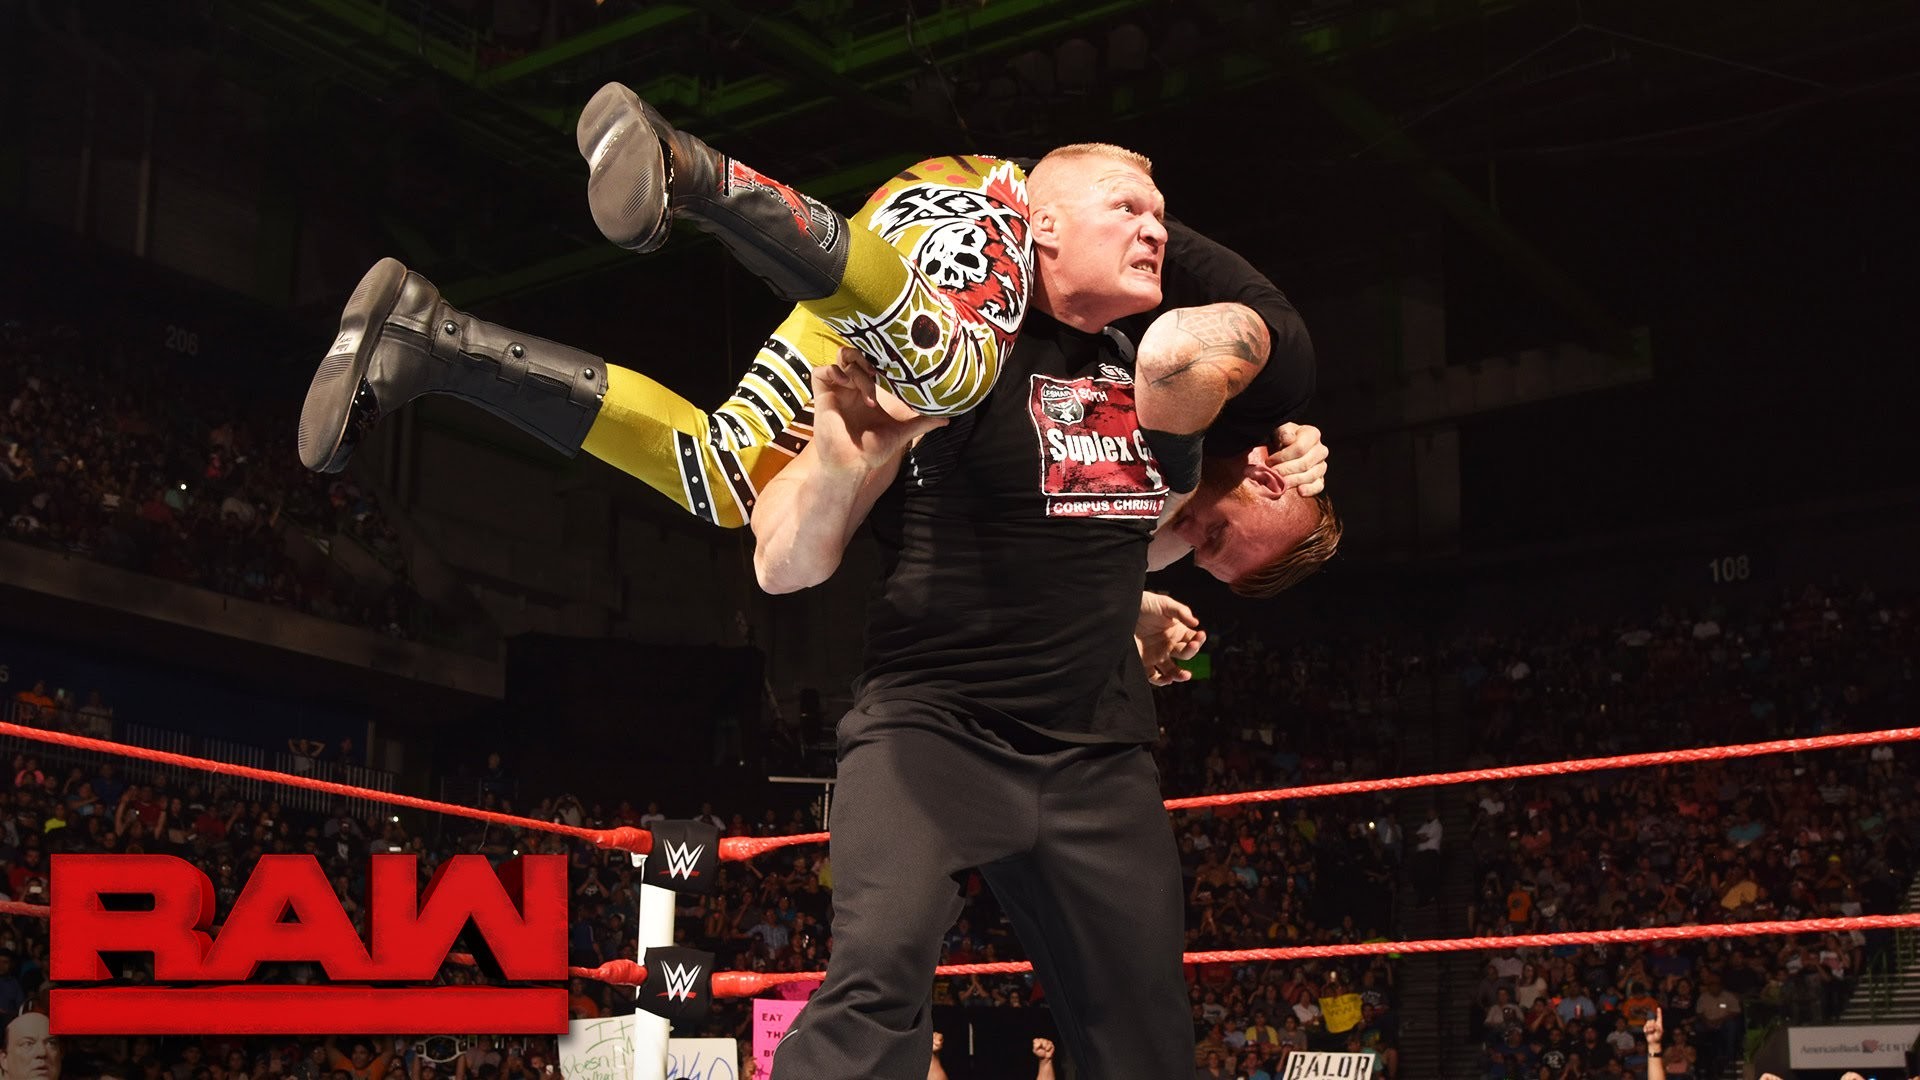 1920x1080 On Raw this week Heath Slater told Brock Lesnar ...